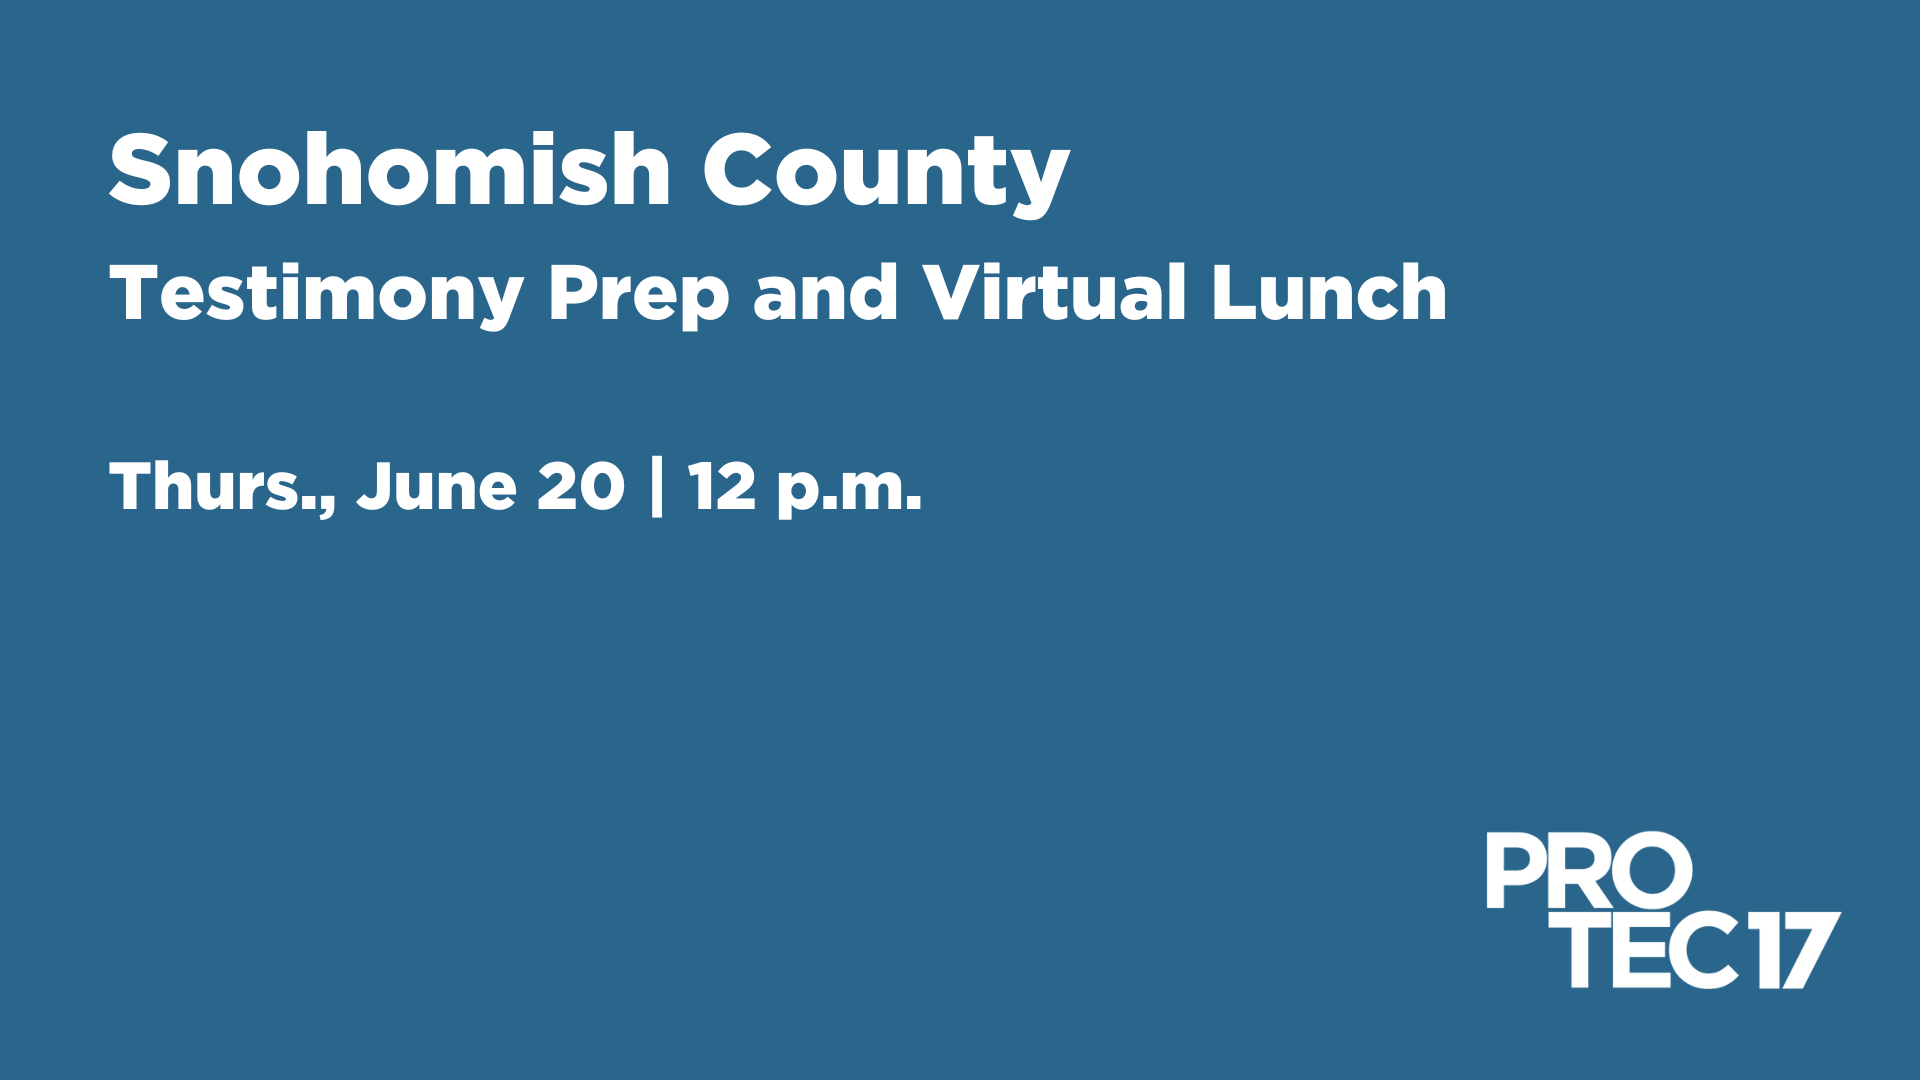 On a blue background the heading text at the top reads, "Snohomish County" followed by the subheading, "Testimony Prep and Virtual Lunch" and smaller text, "Thurs., June 20 | 12 p.m." The PROTEC17 logo is in the bottom right.